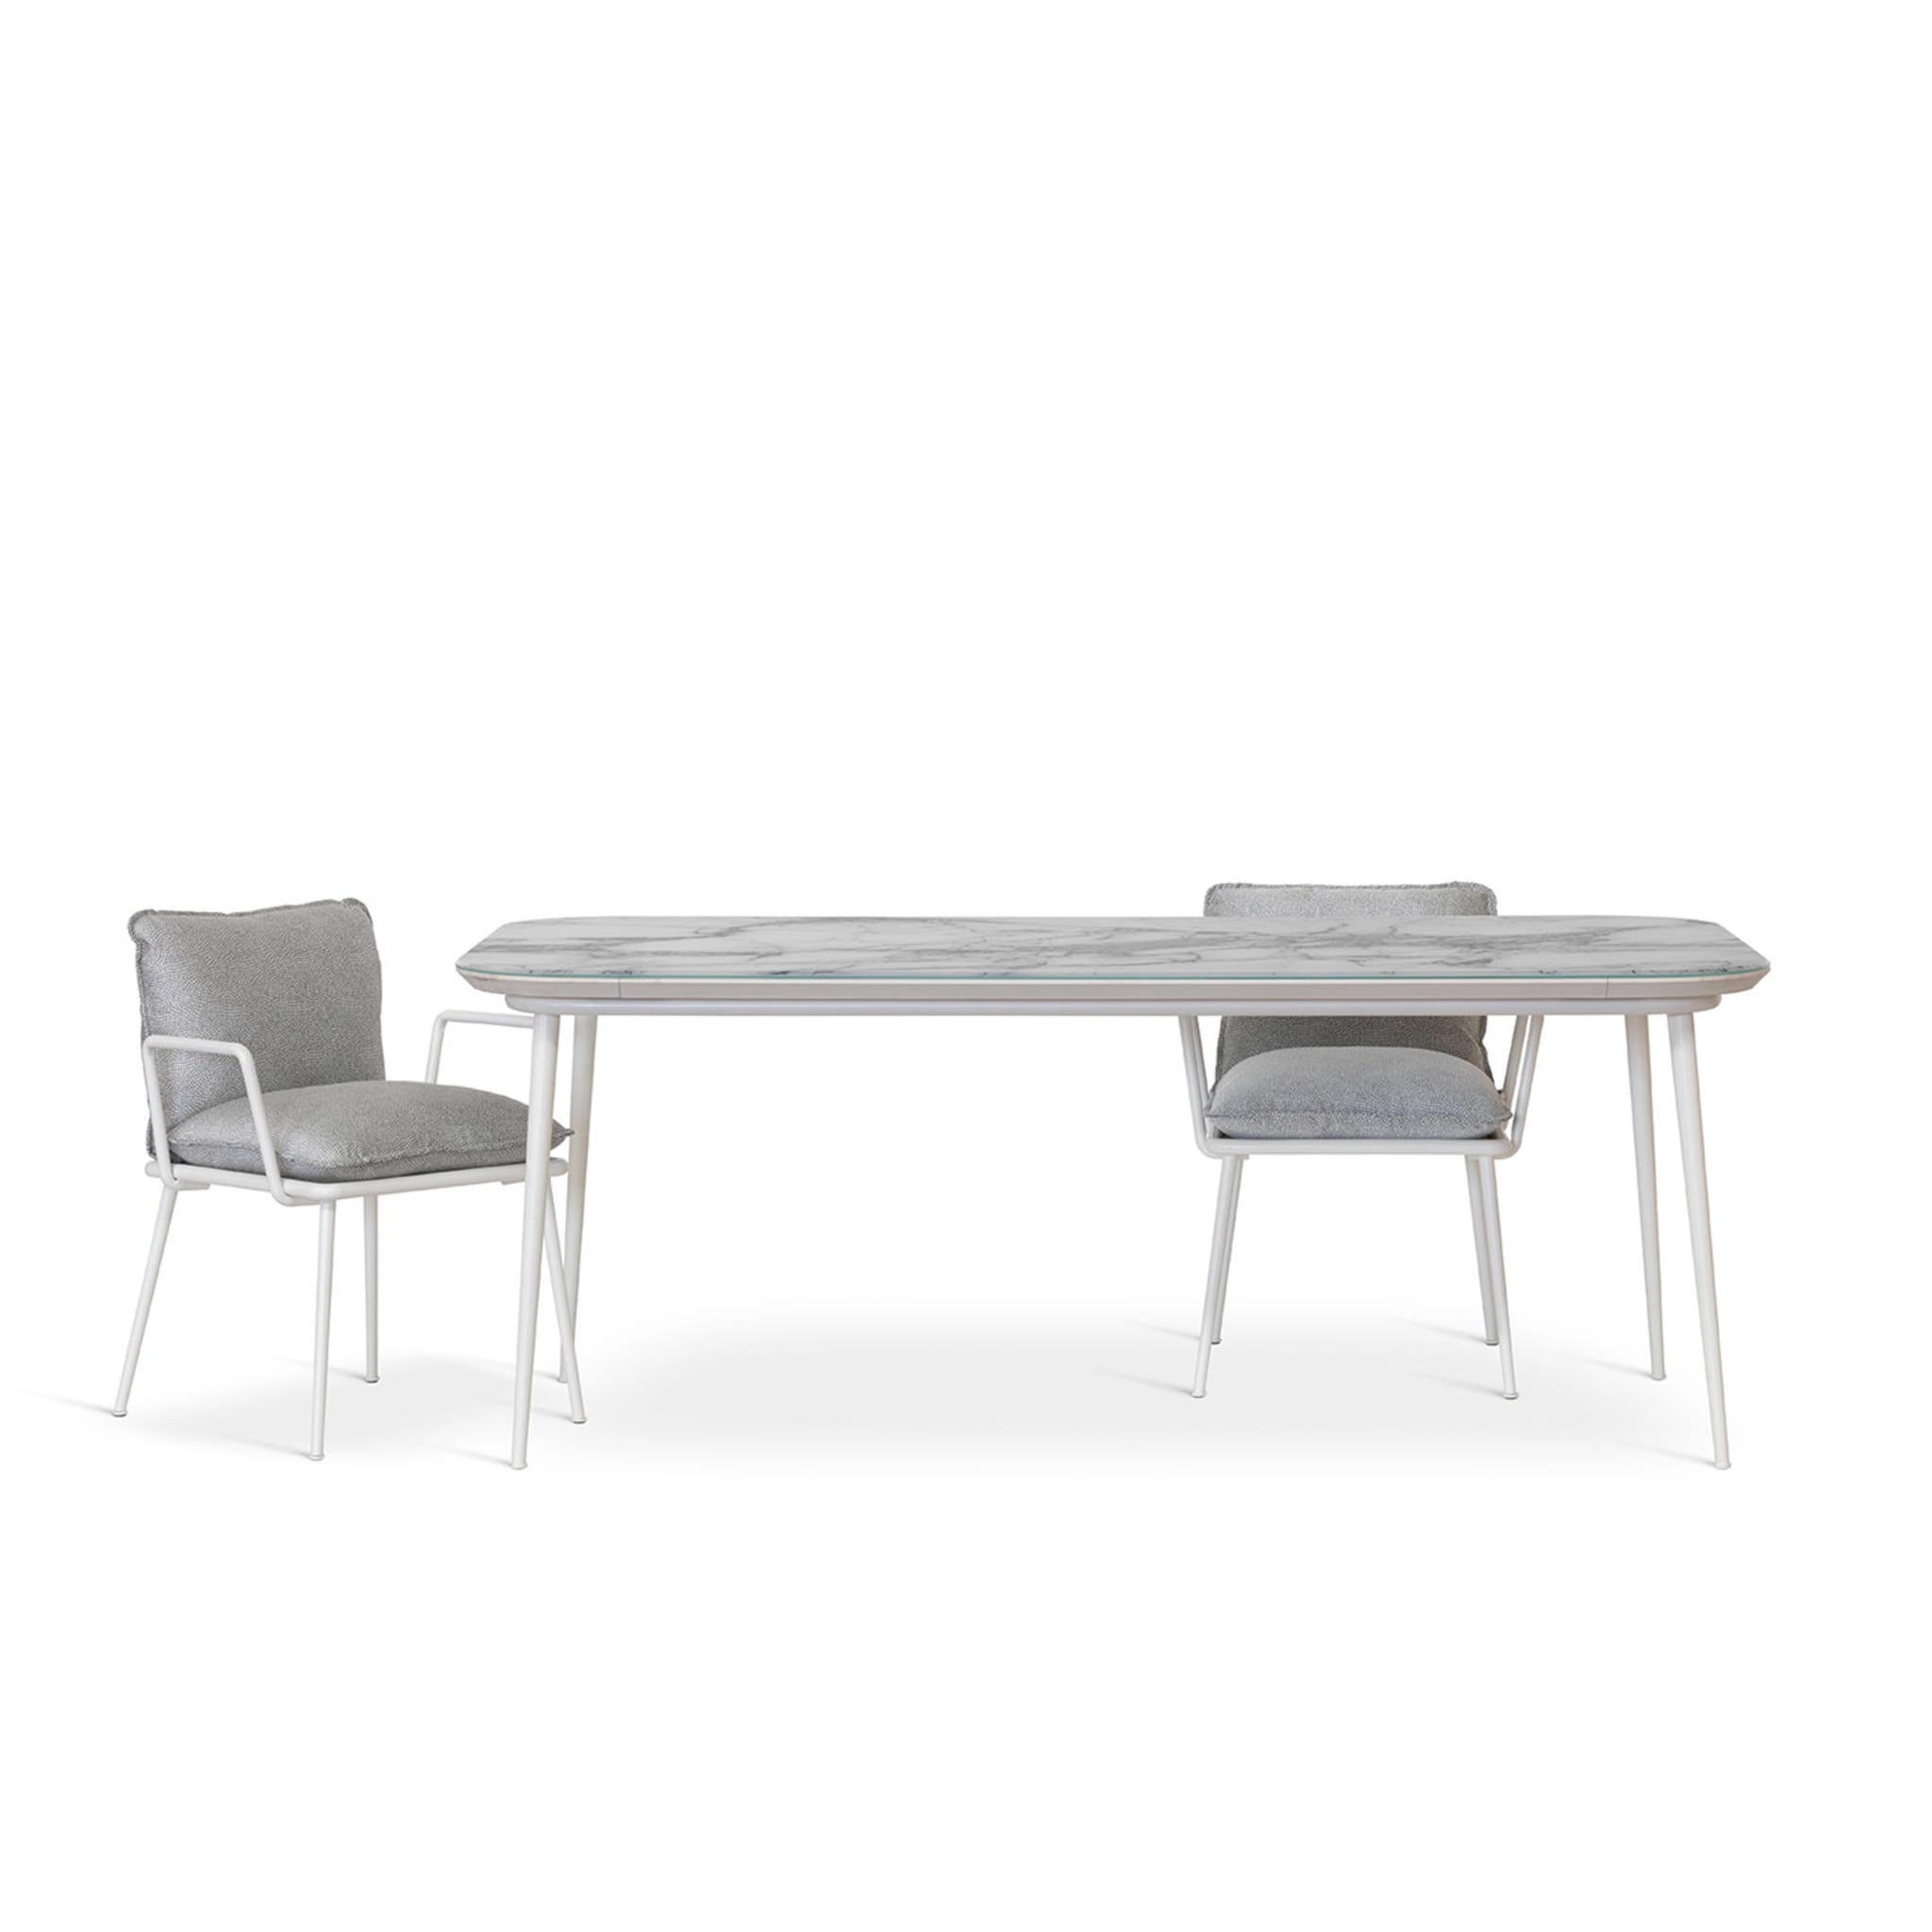 Filicudi Outdoor Dining Table - Alternative view 2